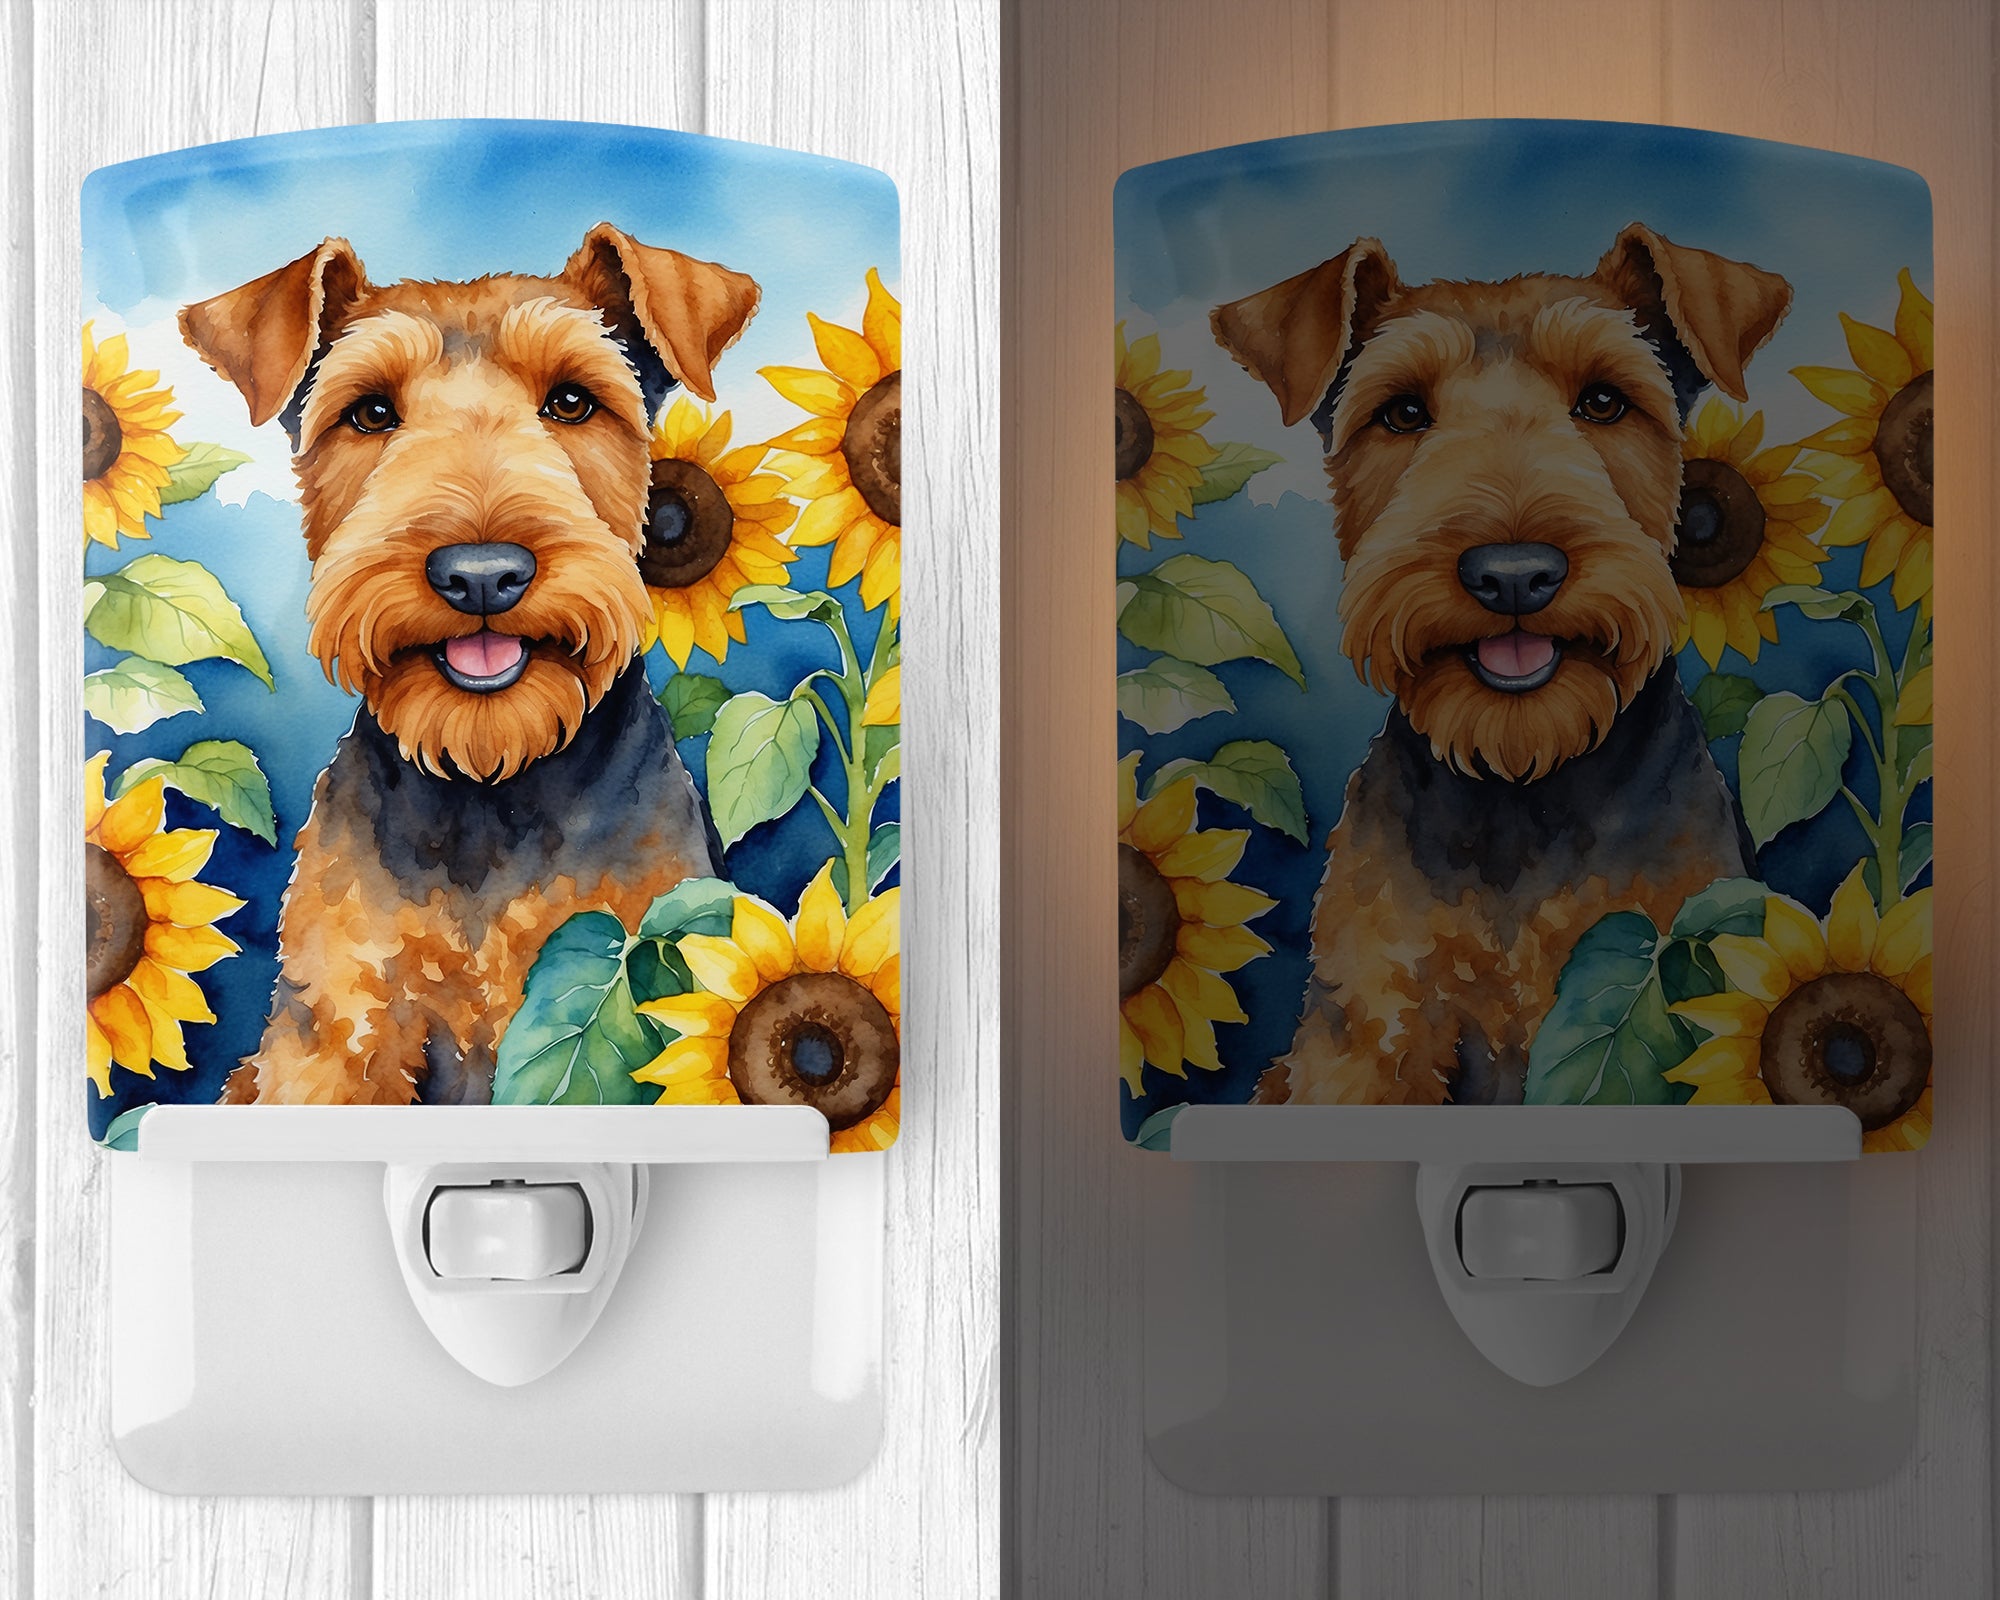 Buy this Airedale Terrier in Sunflowers Ceramic Night Light